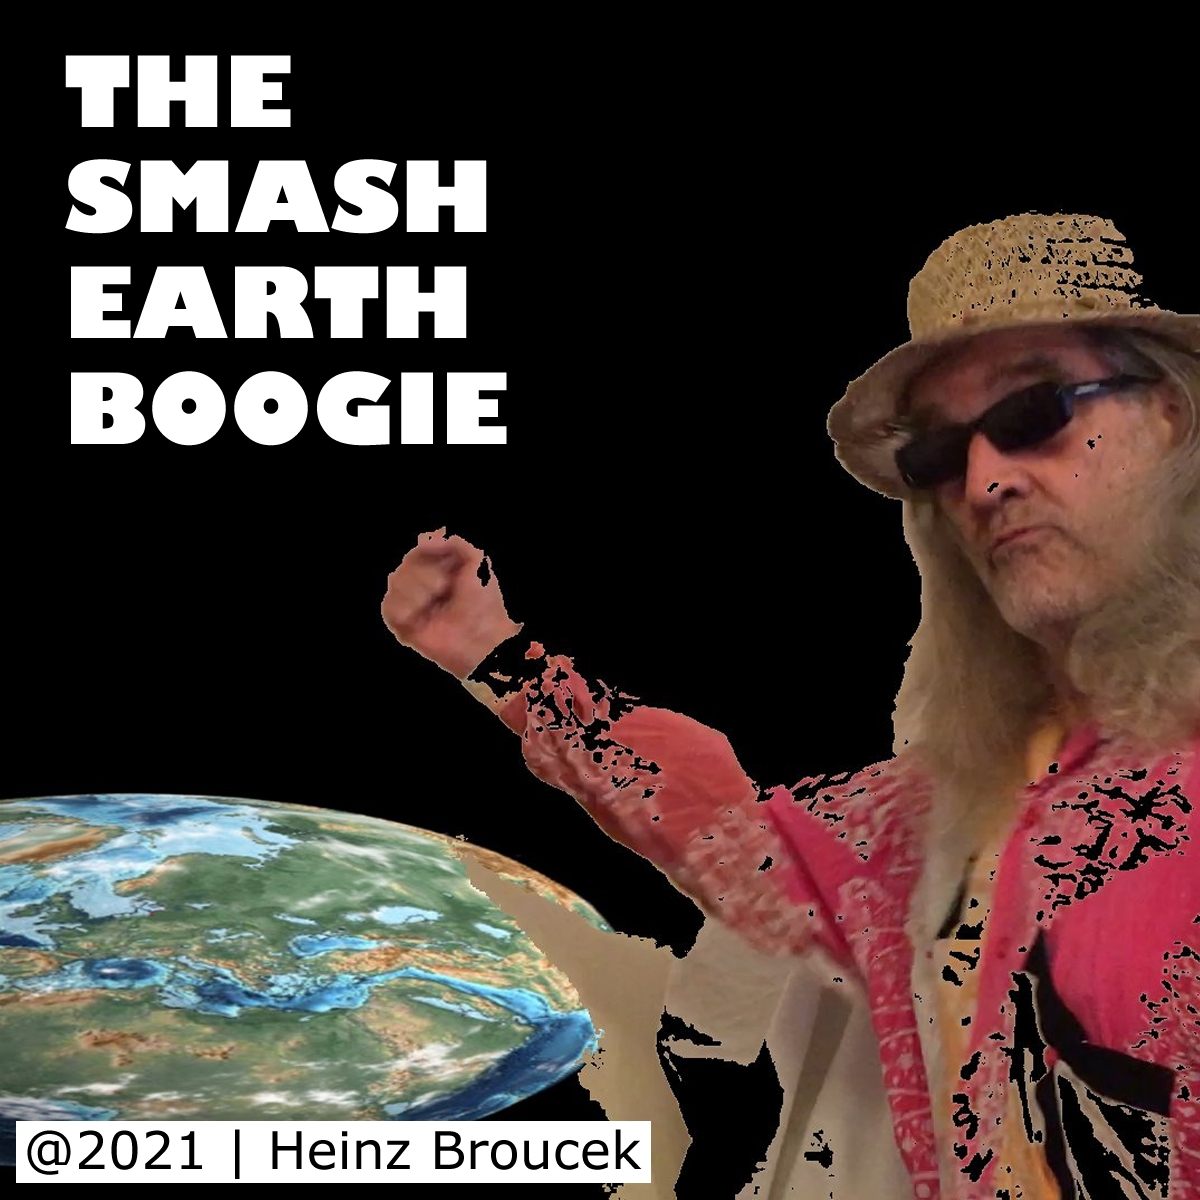 The Smash Earth Boogie